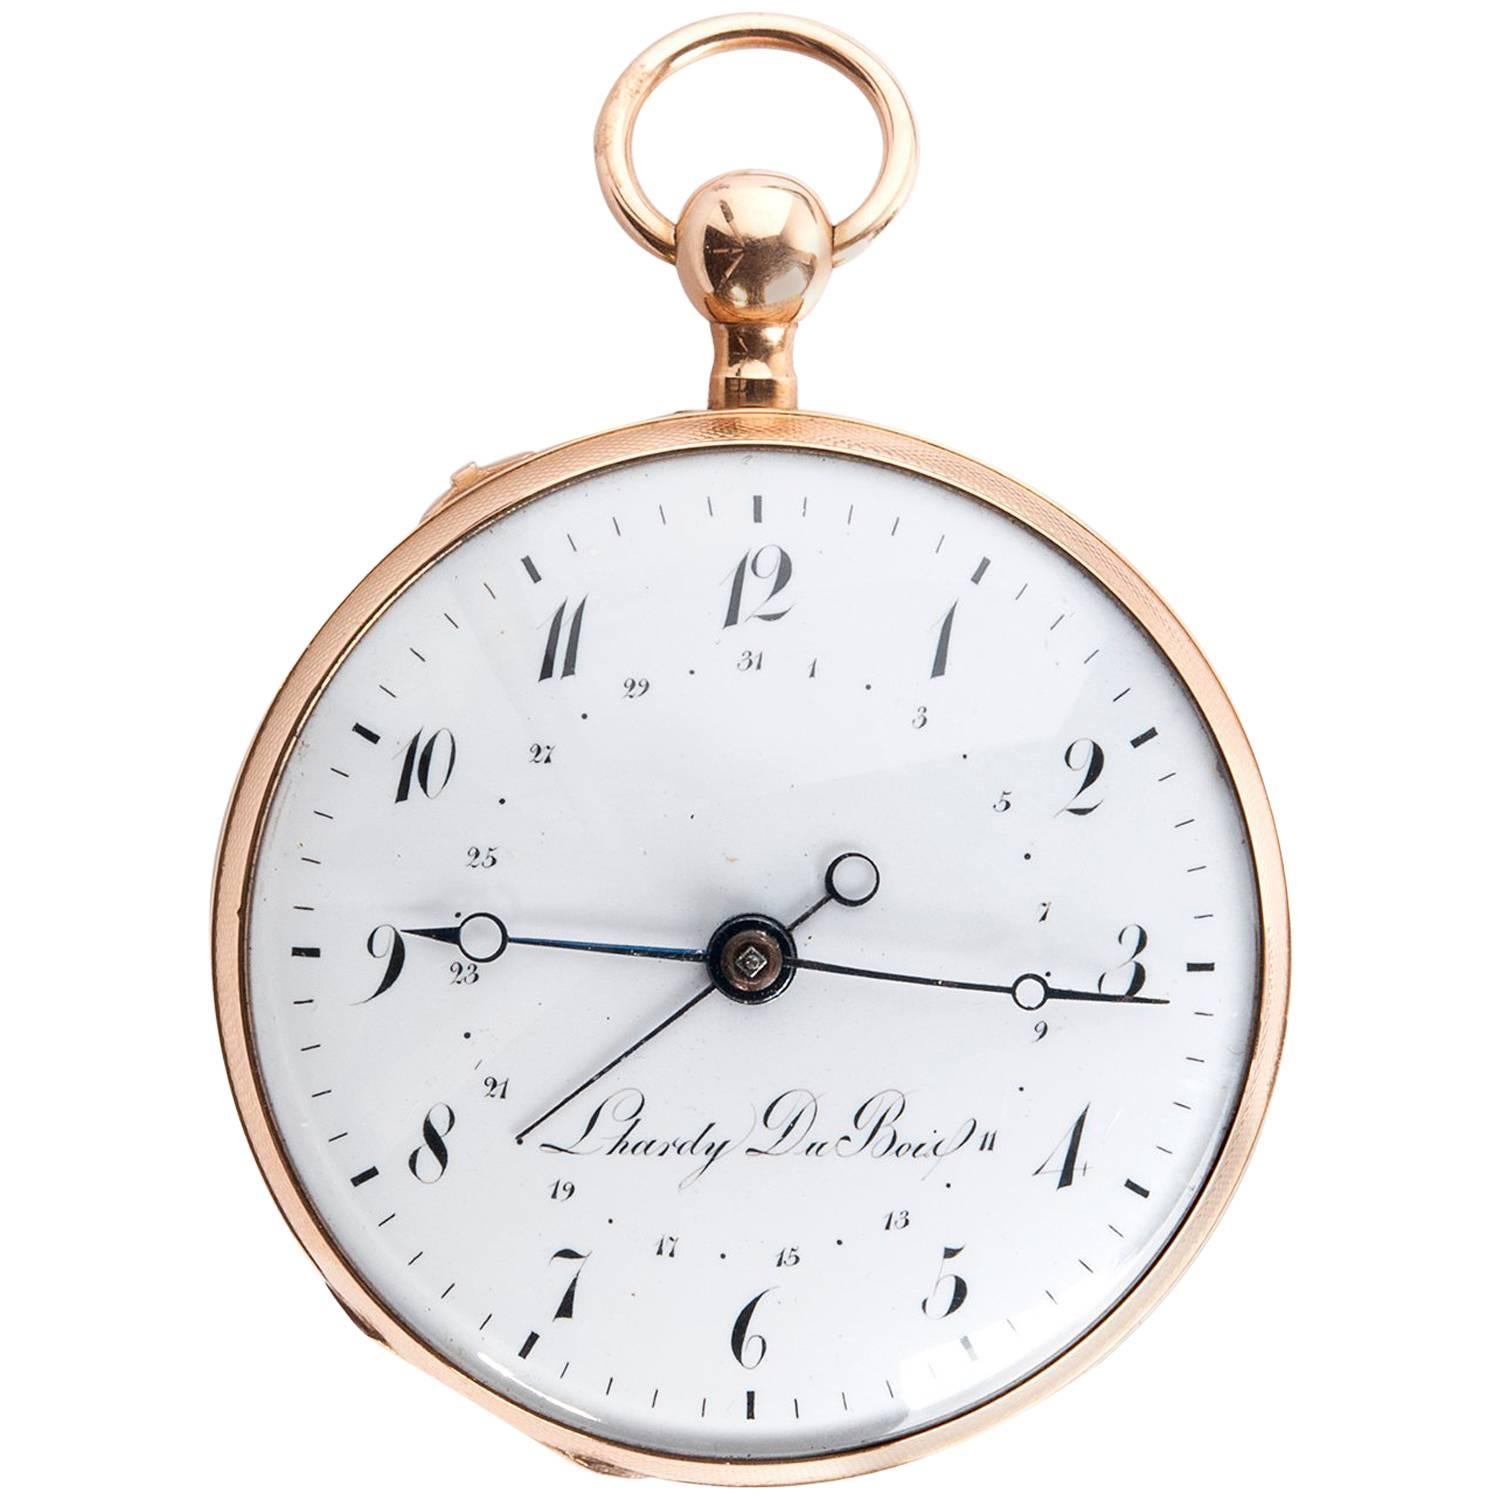 L'Hardy du Bois Yellow Gold Quarter Repeater and Calendar Pocket Watch, 1820 For Sale